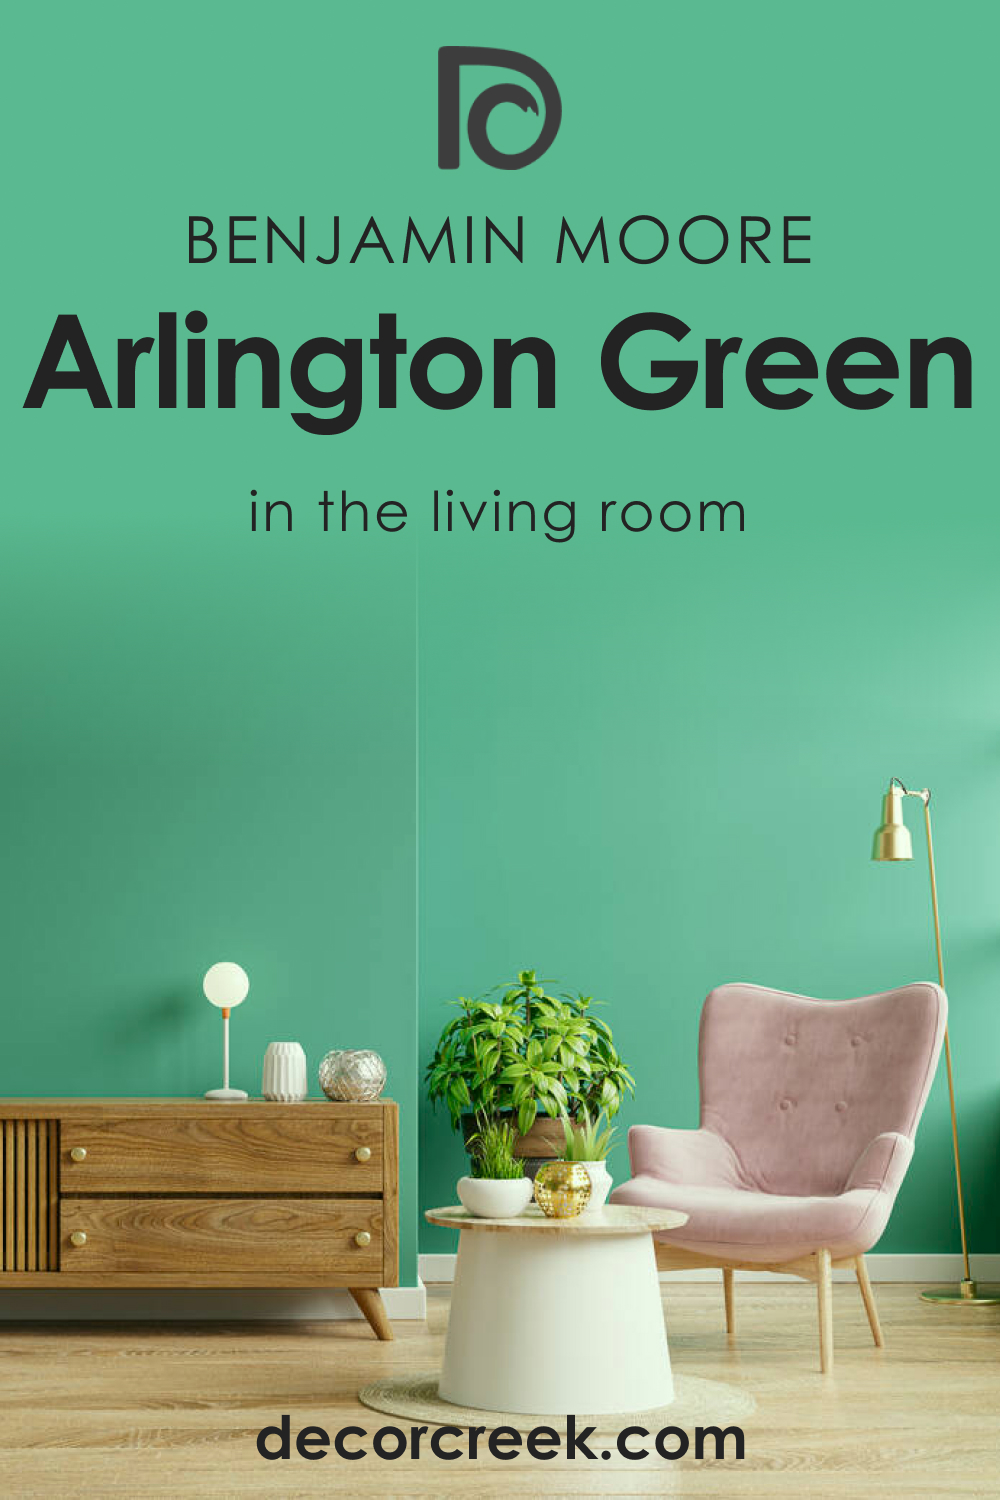 How to Use Arlington Green 580 in the Living Room?